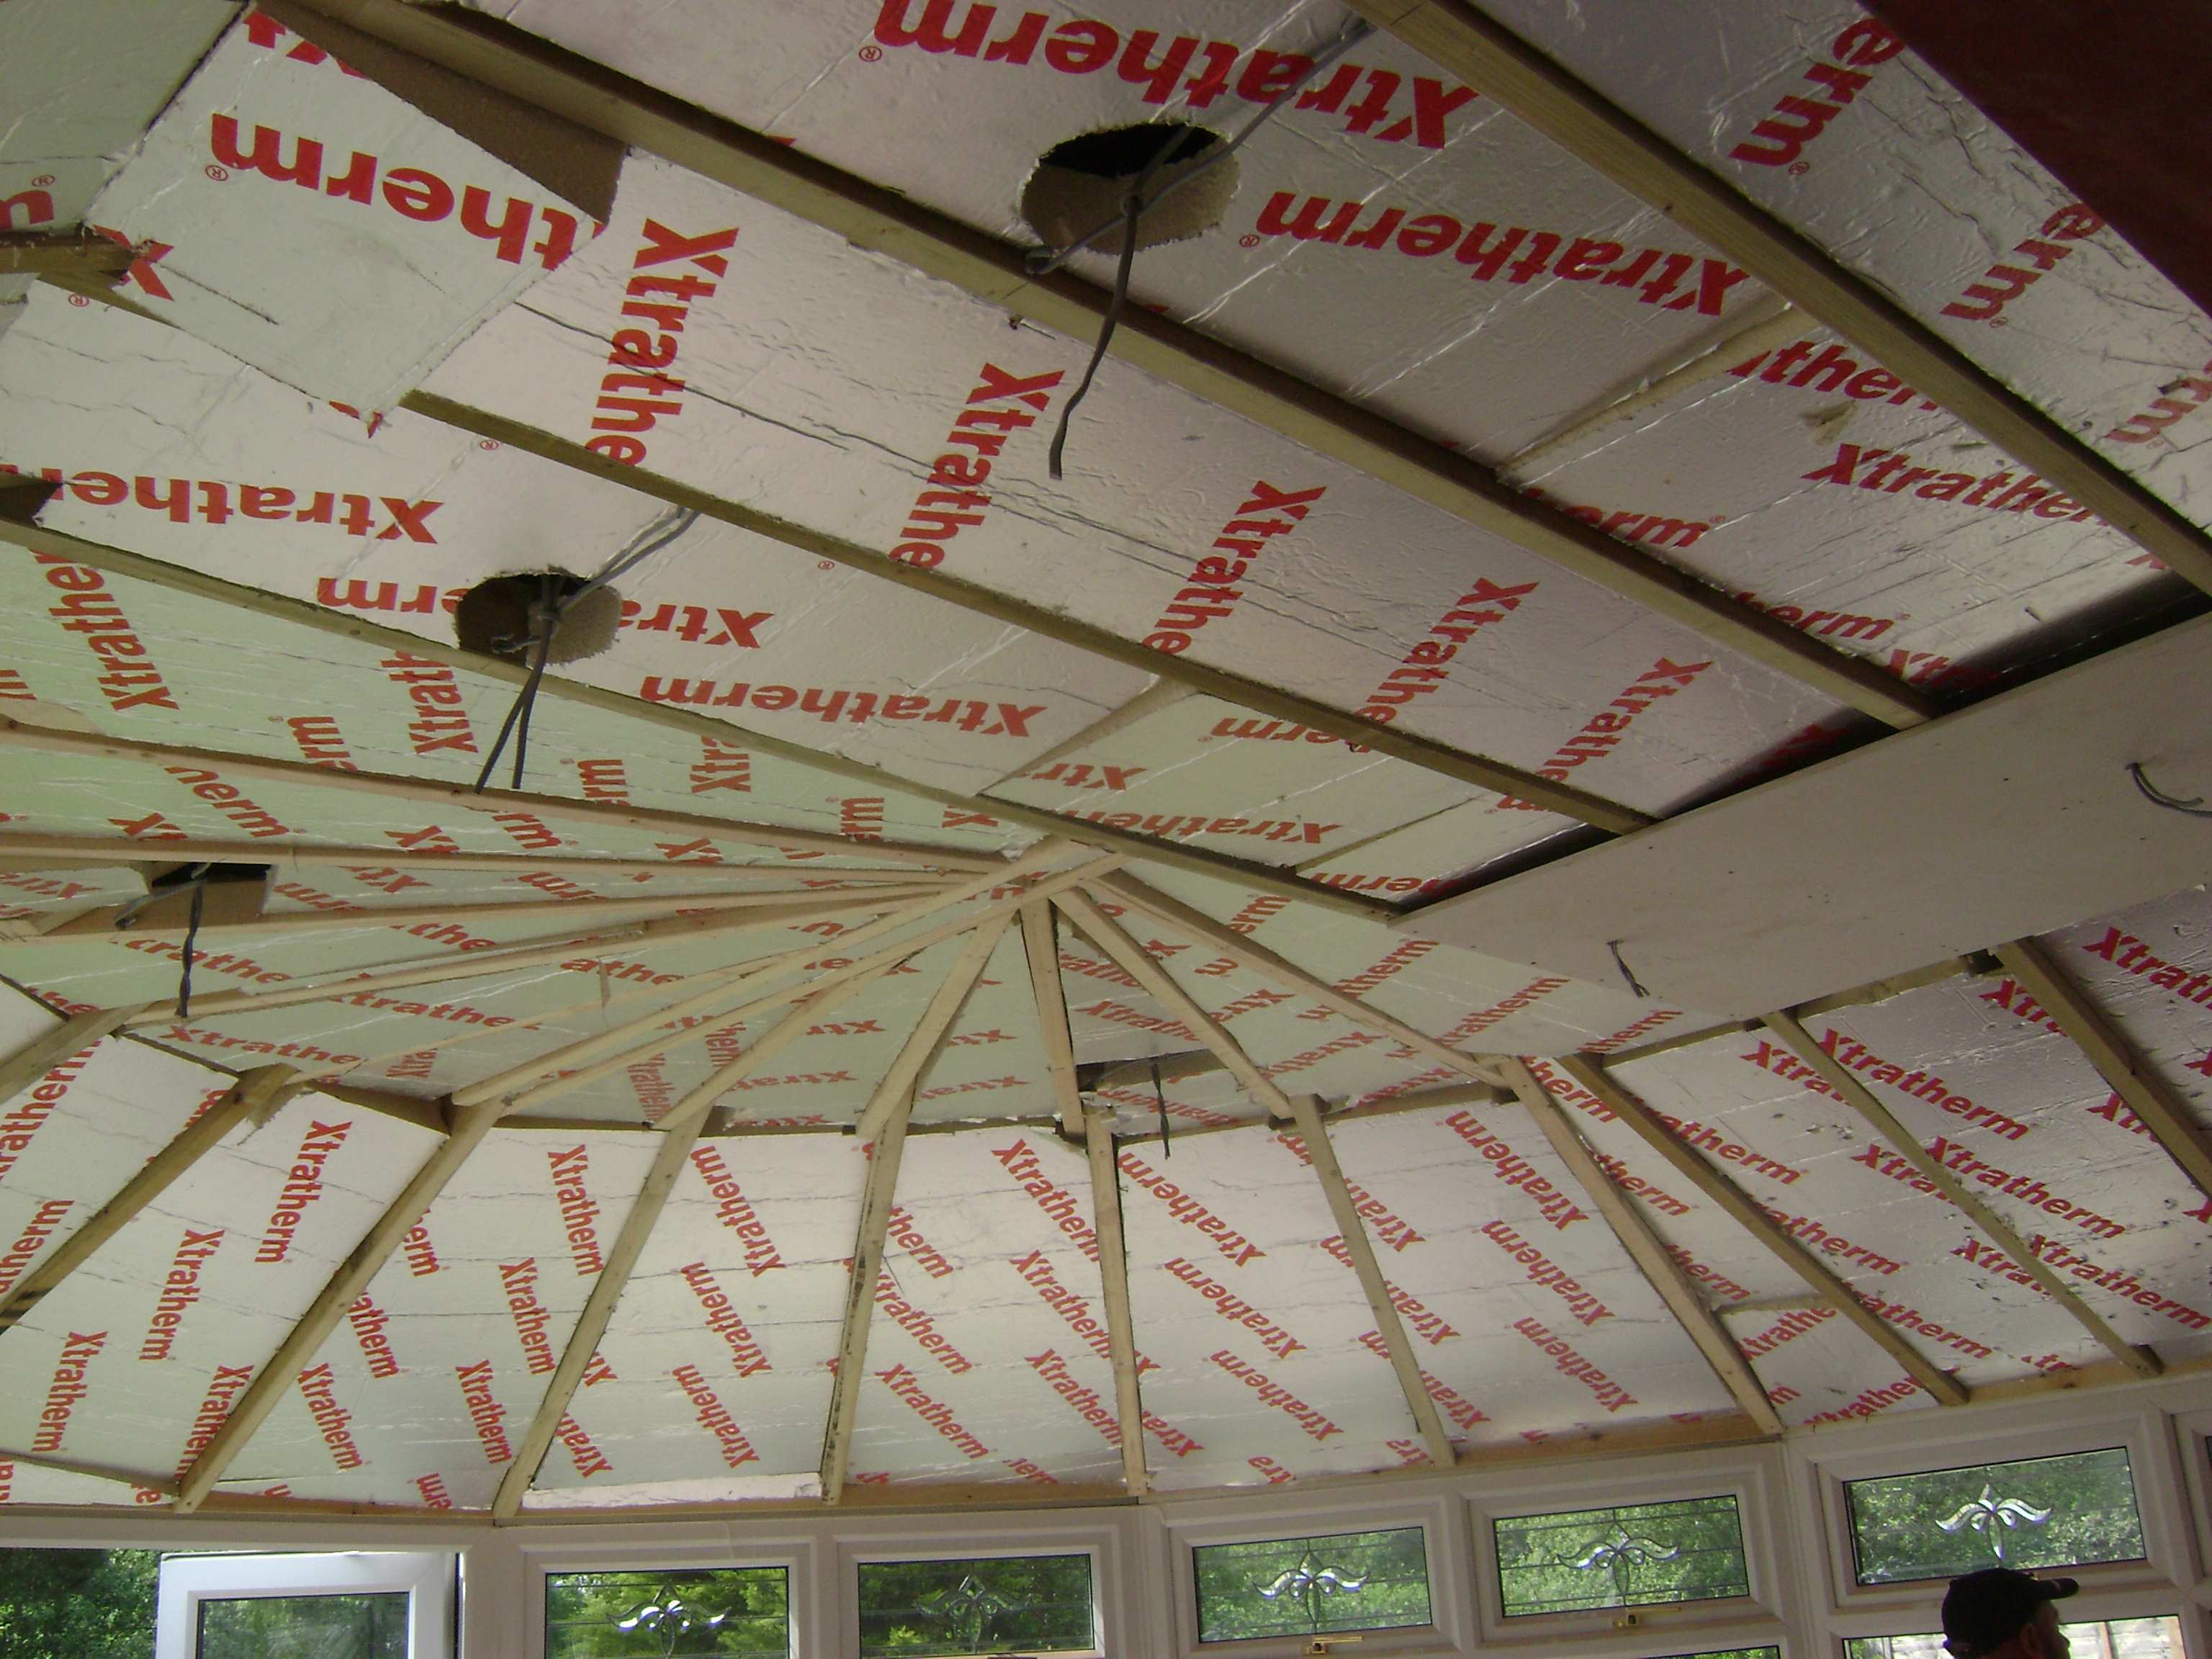 The insulation completed and the first sheet in position